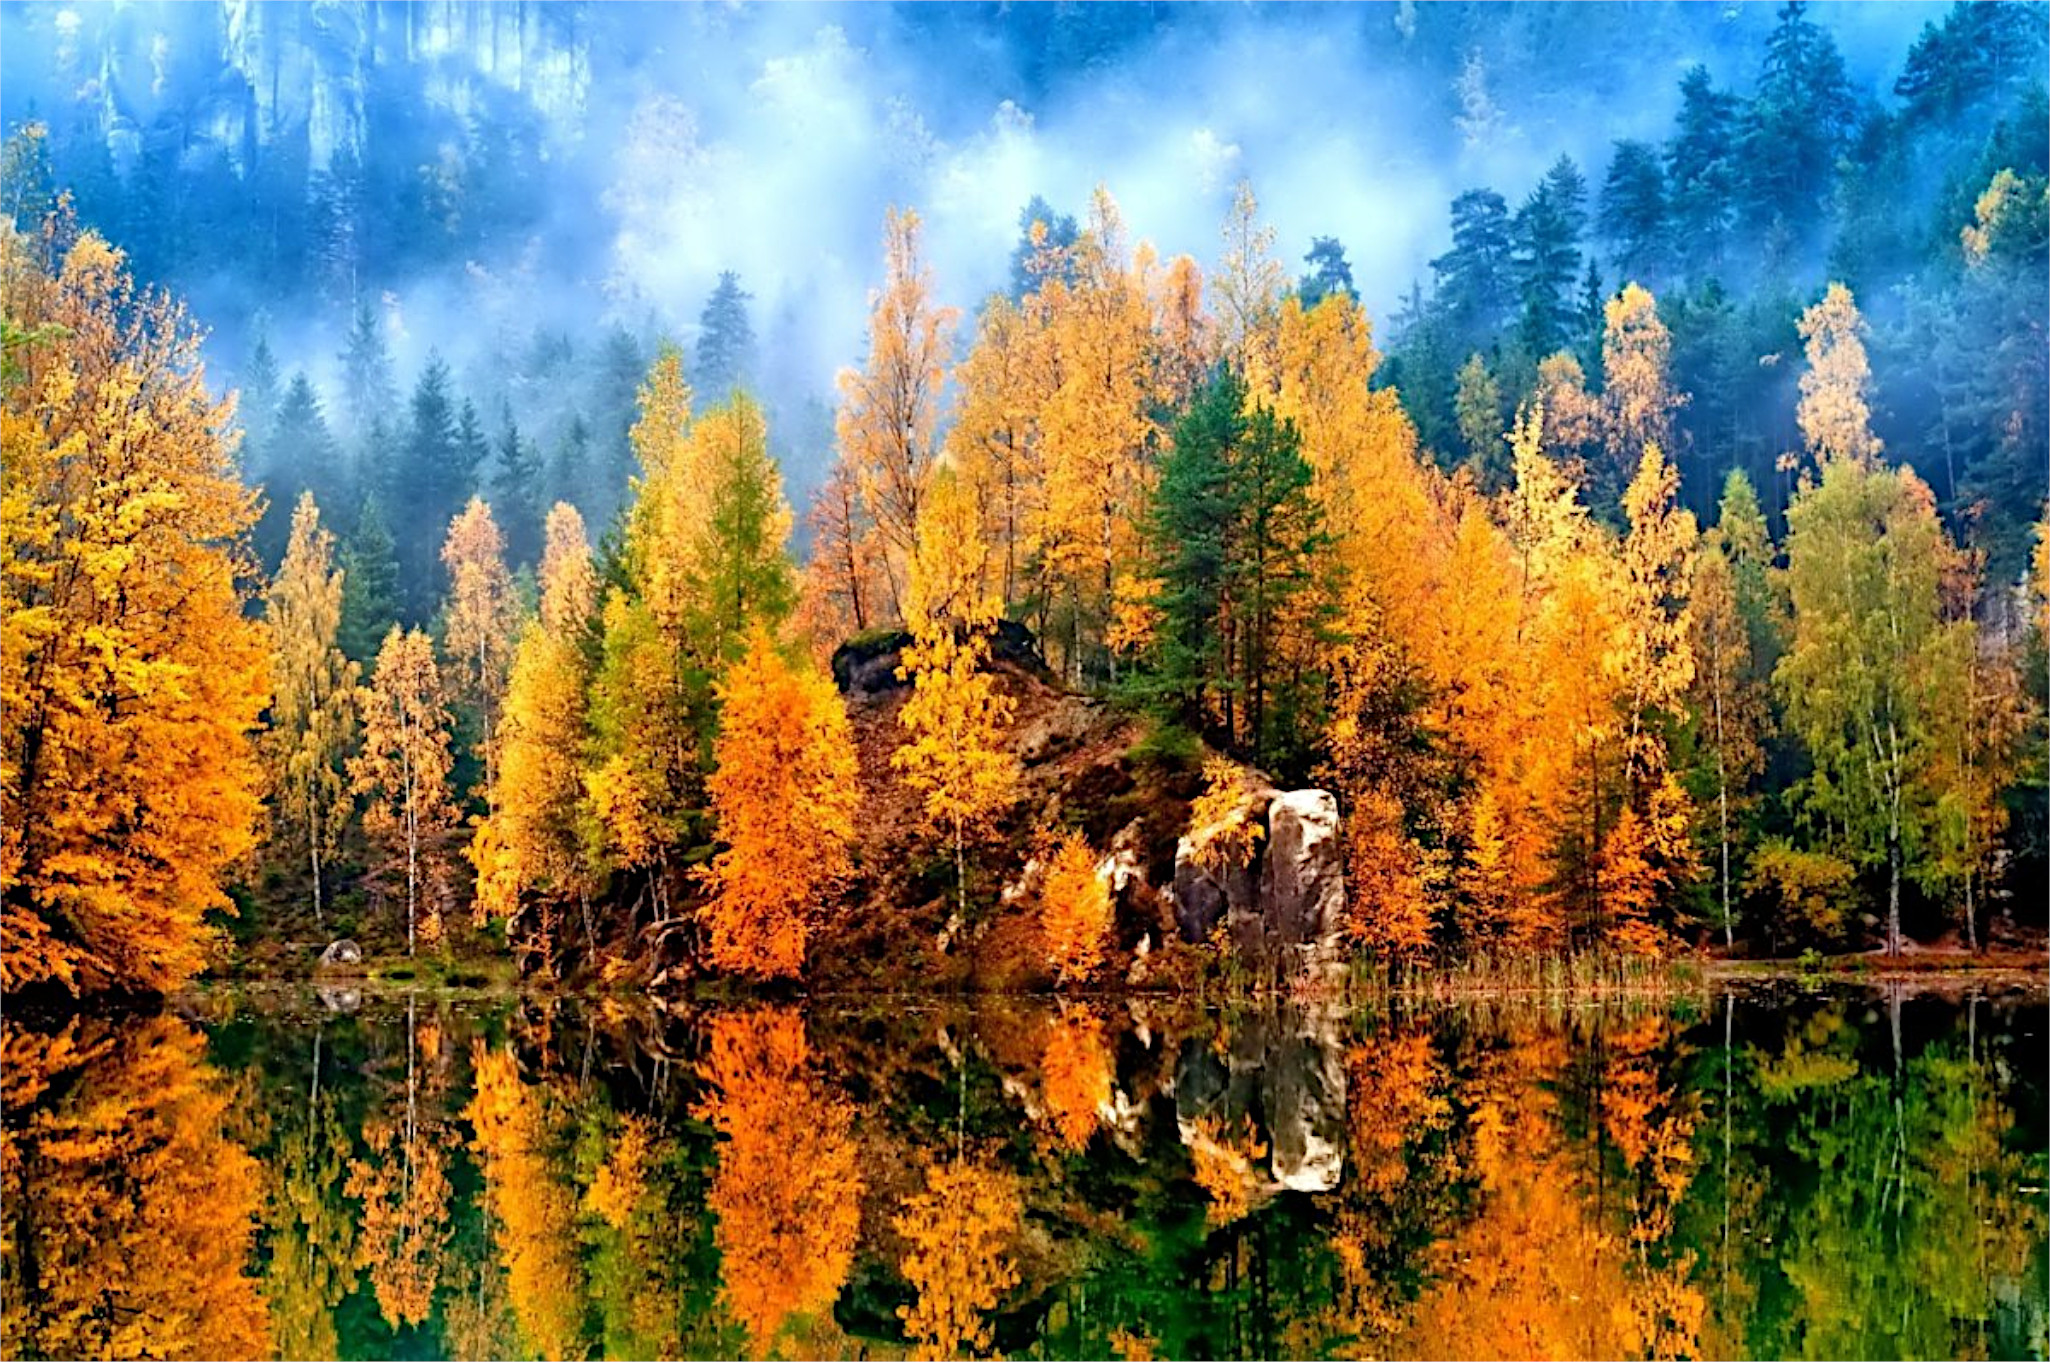 A picture of fall nature by the river